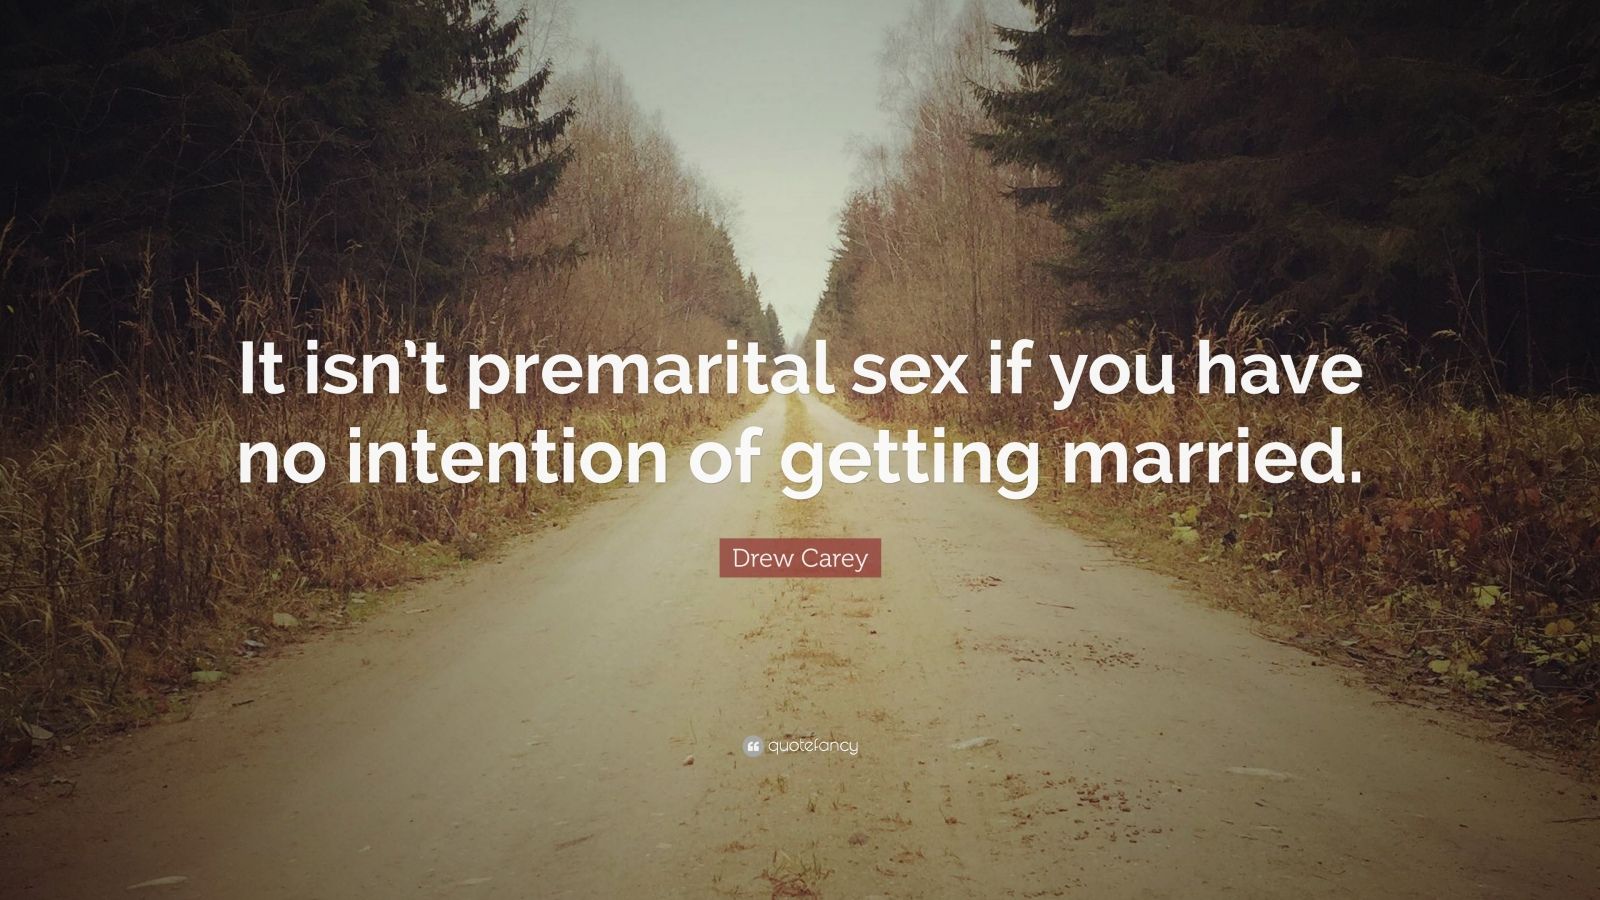 Drew Carey Quote “it Isnt Premarital Sex If You Have No Intention Of Getting Married” 